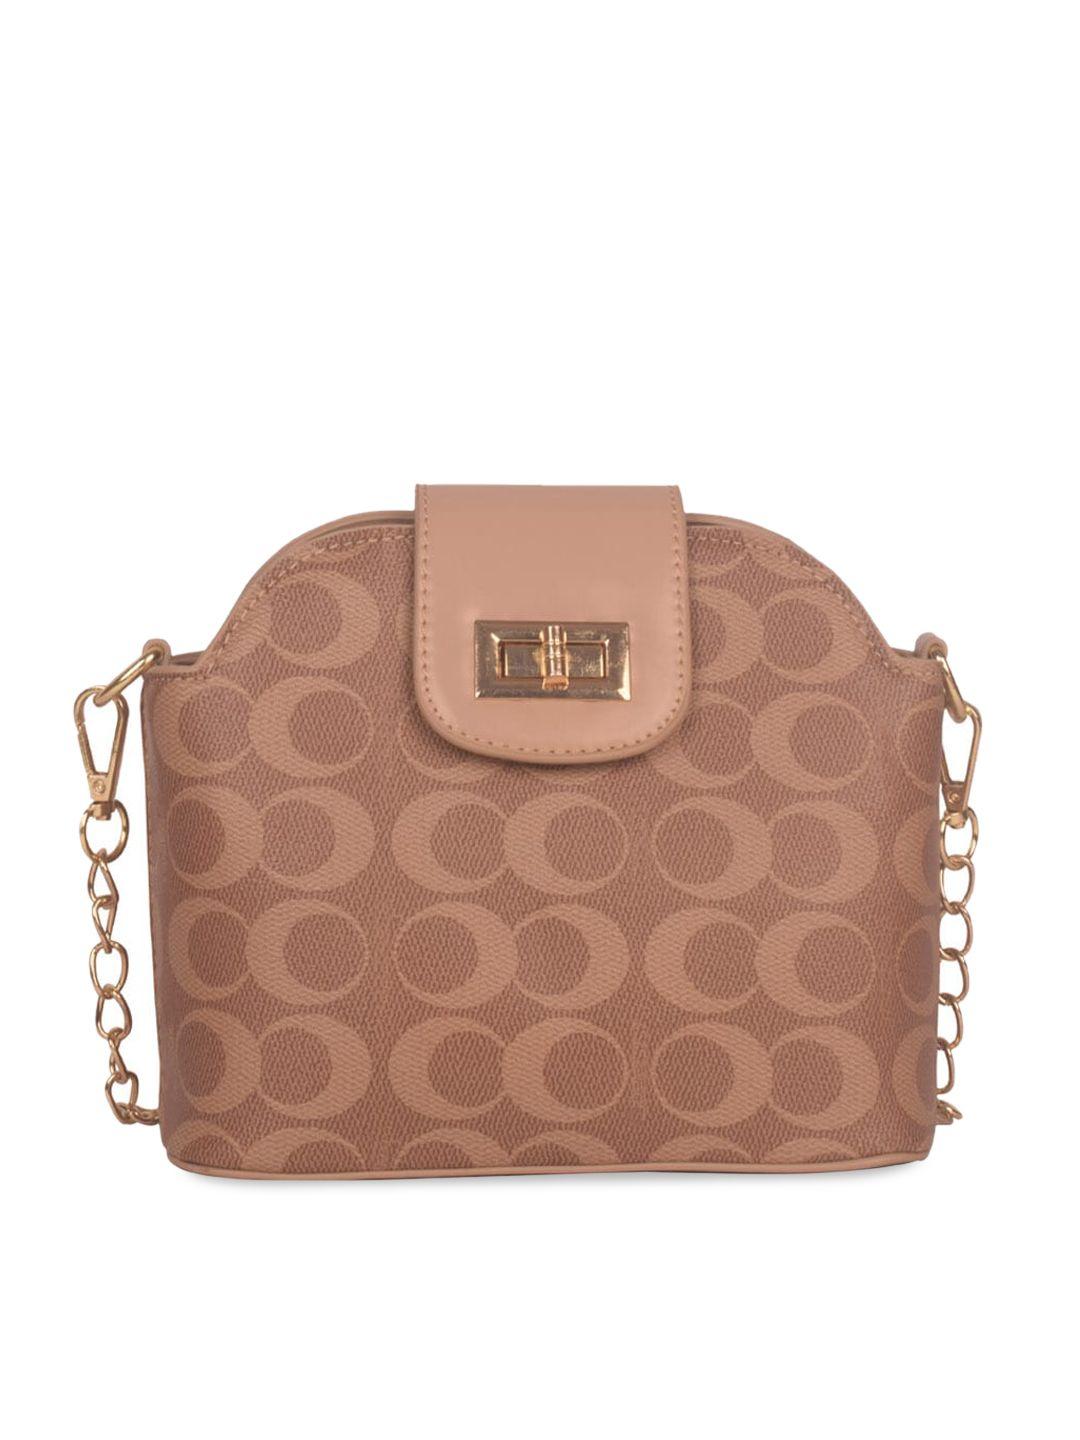 bagkok brown textured pu structured handheld bag with tasselled